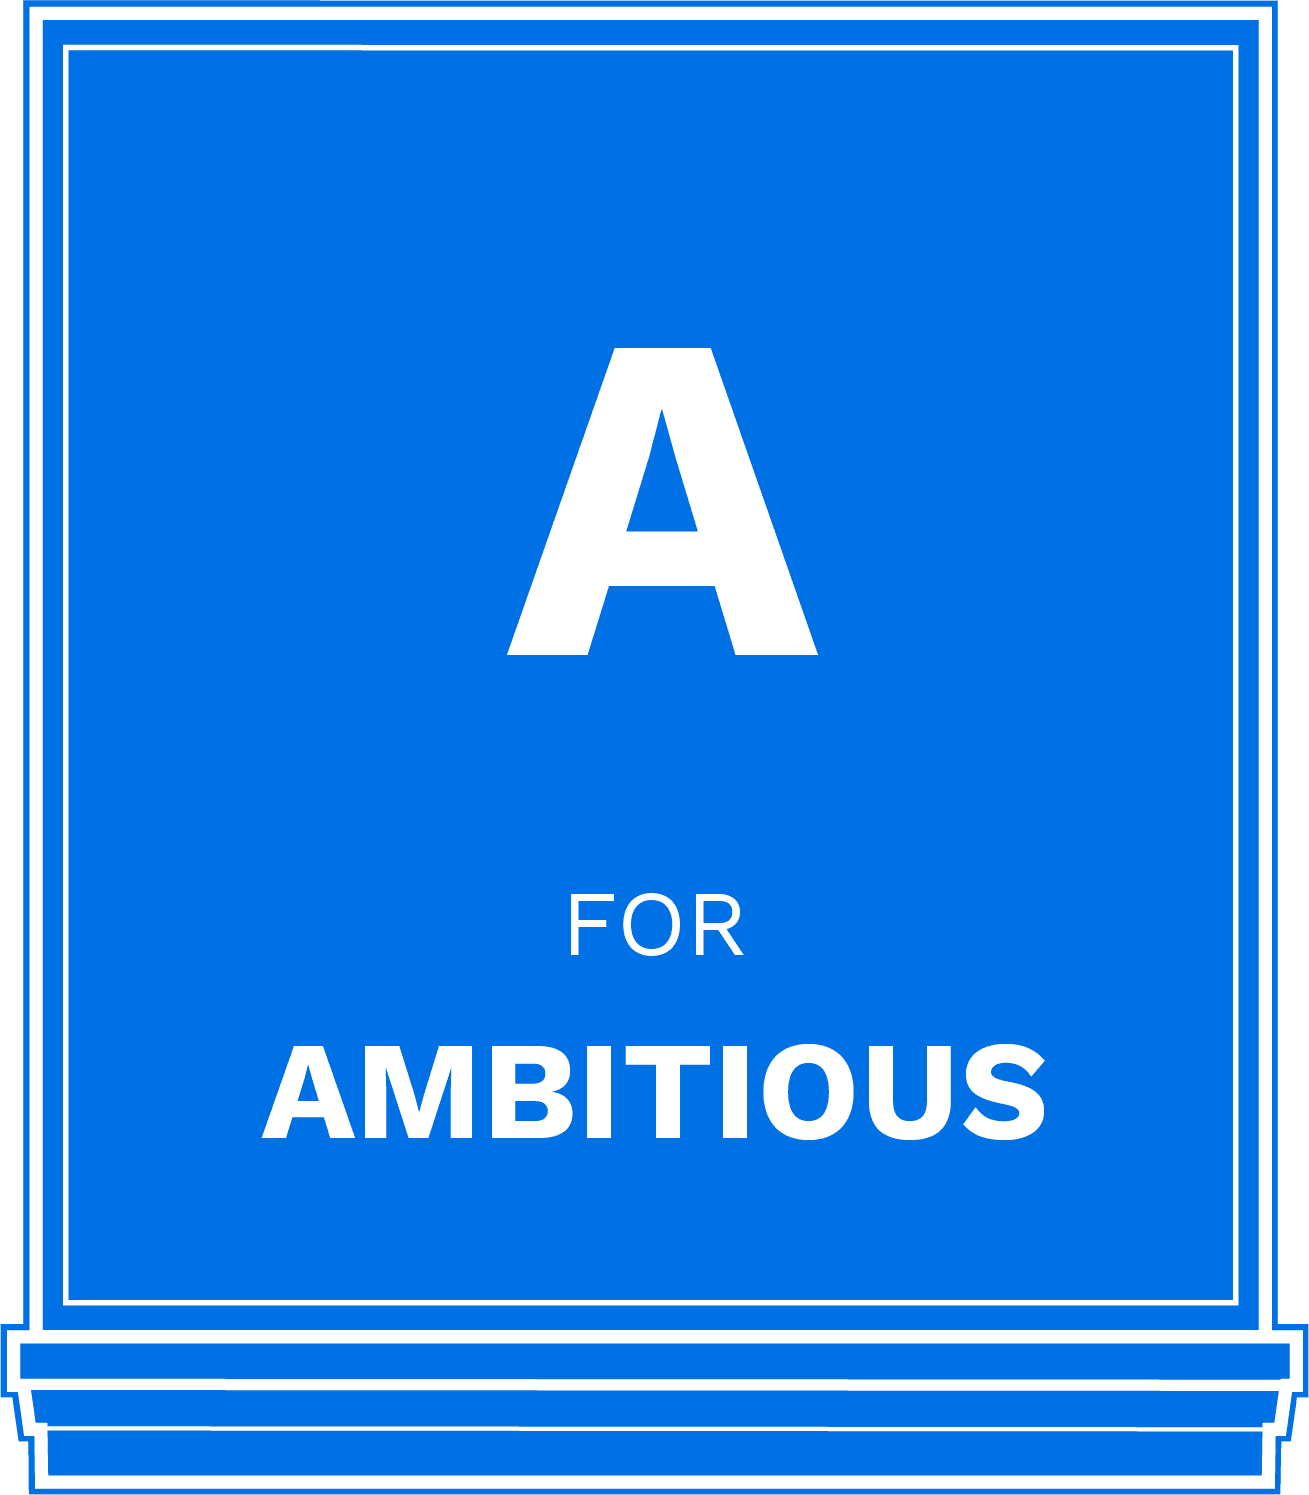 A står for Ambitious (ambition)